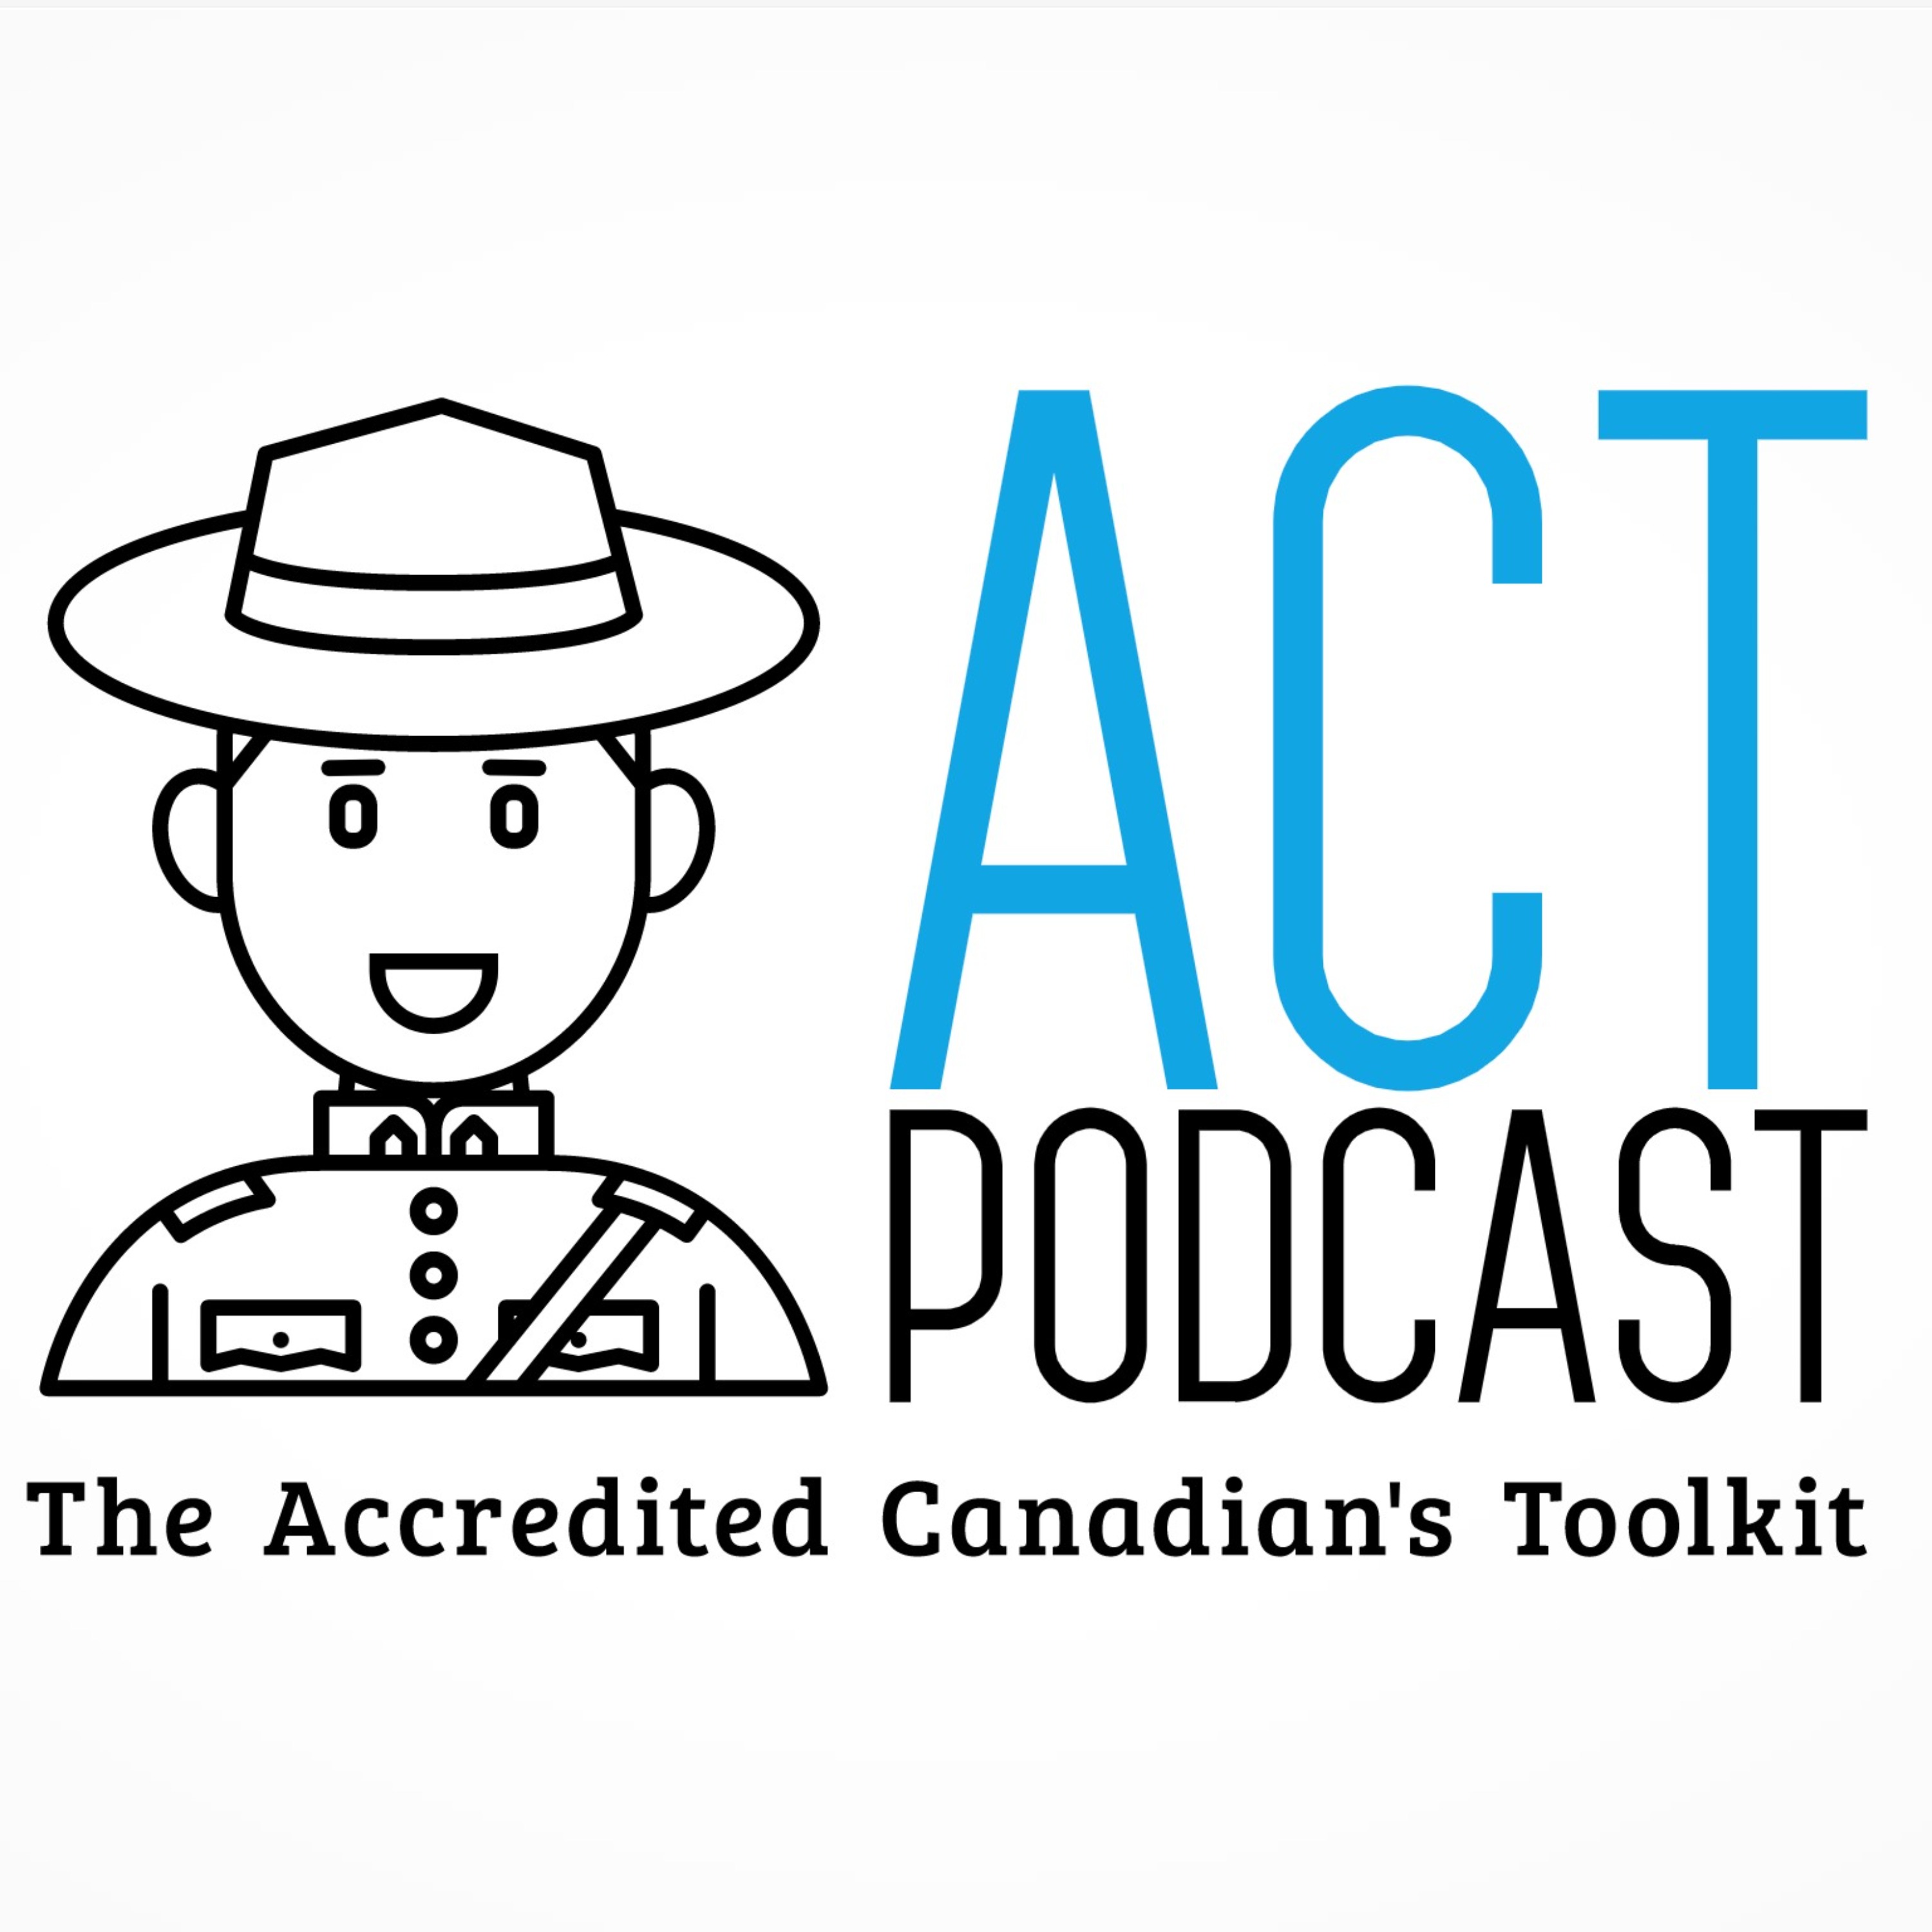 The Accredited Canadian's Toolkit